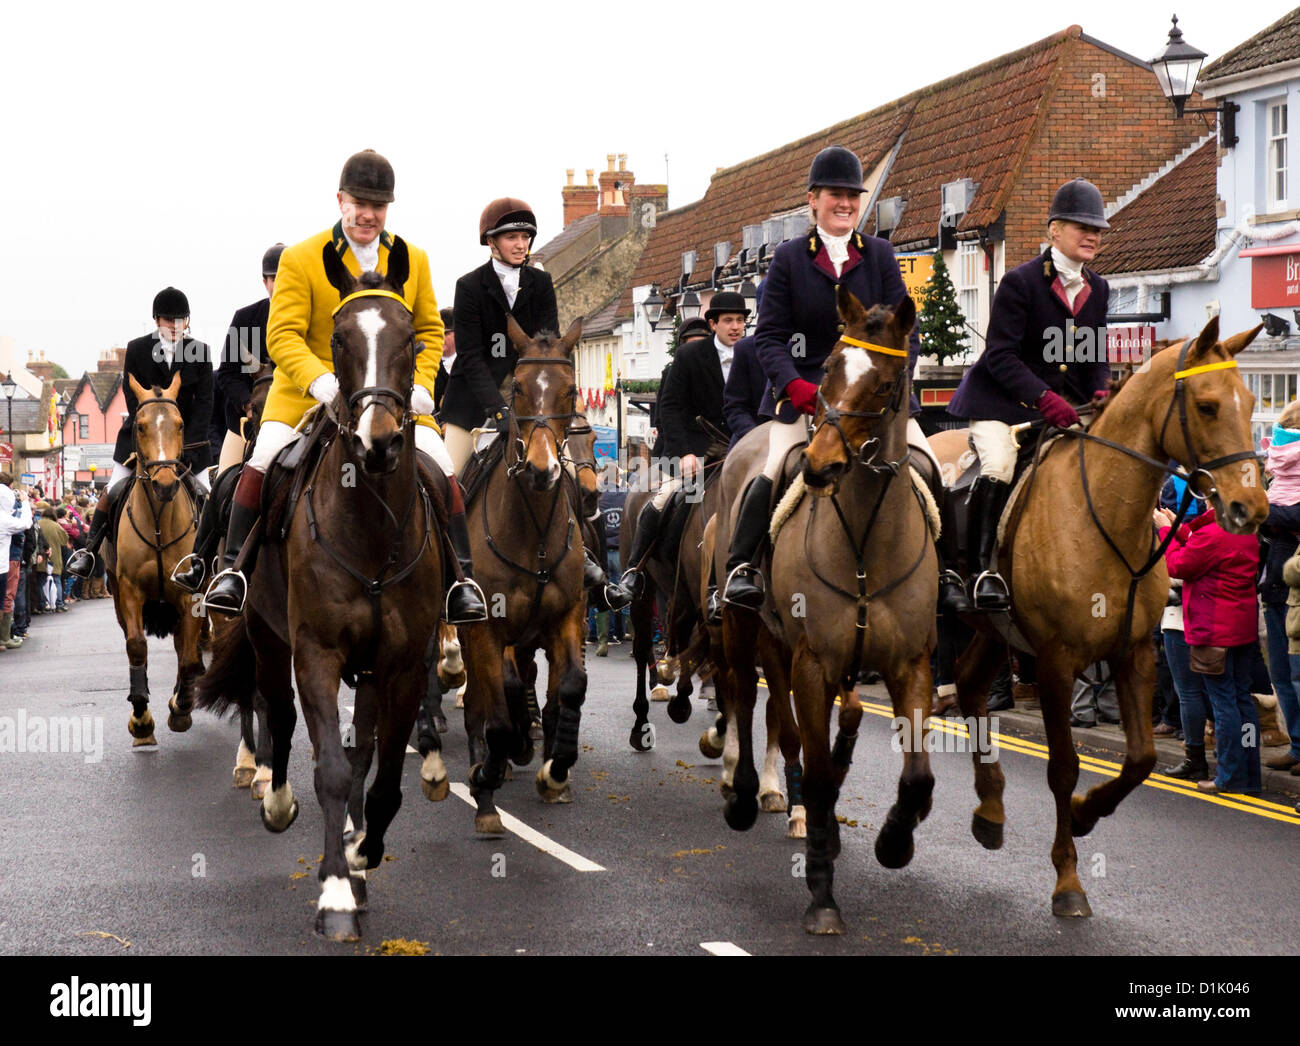 On Boxing Day, 26th December 2012 the Berkeley Hunt ride through the center of Thornbury town in Gloucestershire. Many members of the public turned out in cold weather to support this festive event. Credit:  JMF News / Alamy Live News Stock Photo